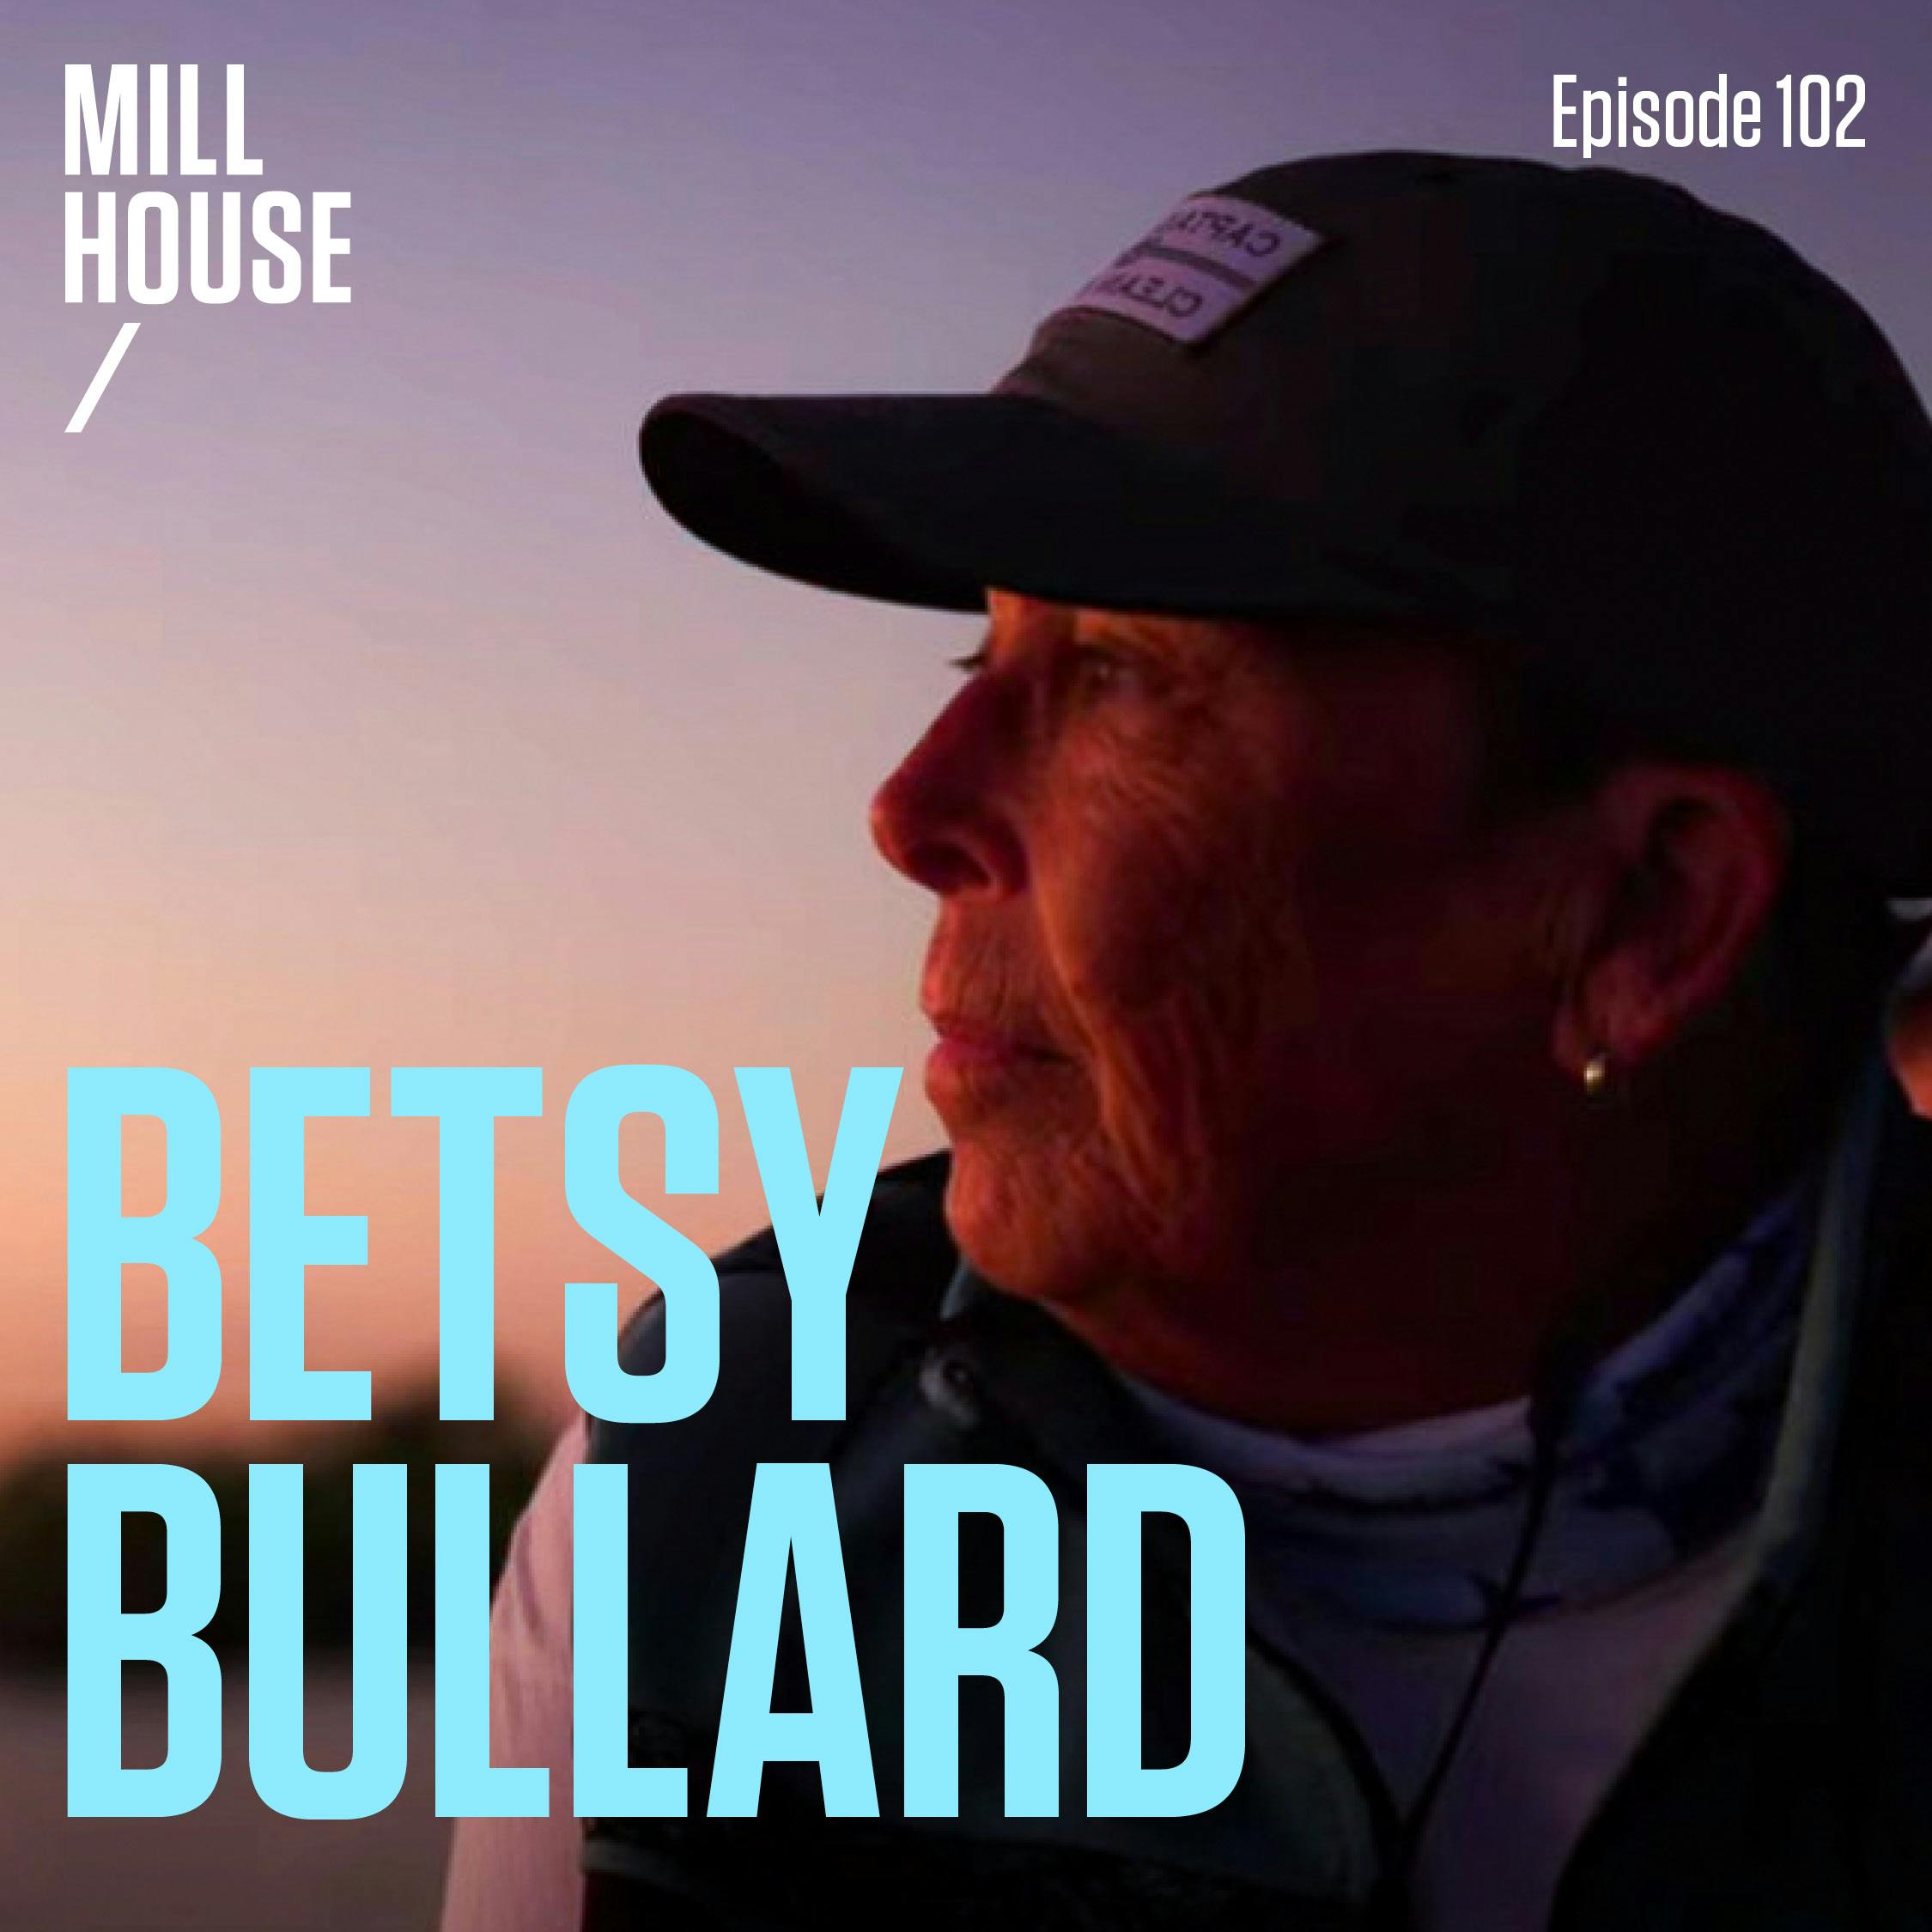 Episode 102: Betsy Bullard - The "Swamp Witch"